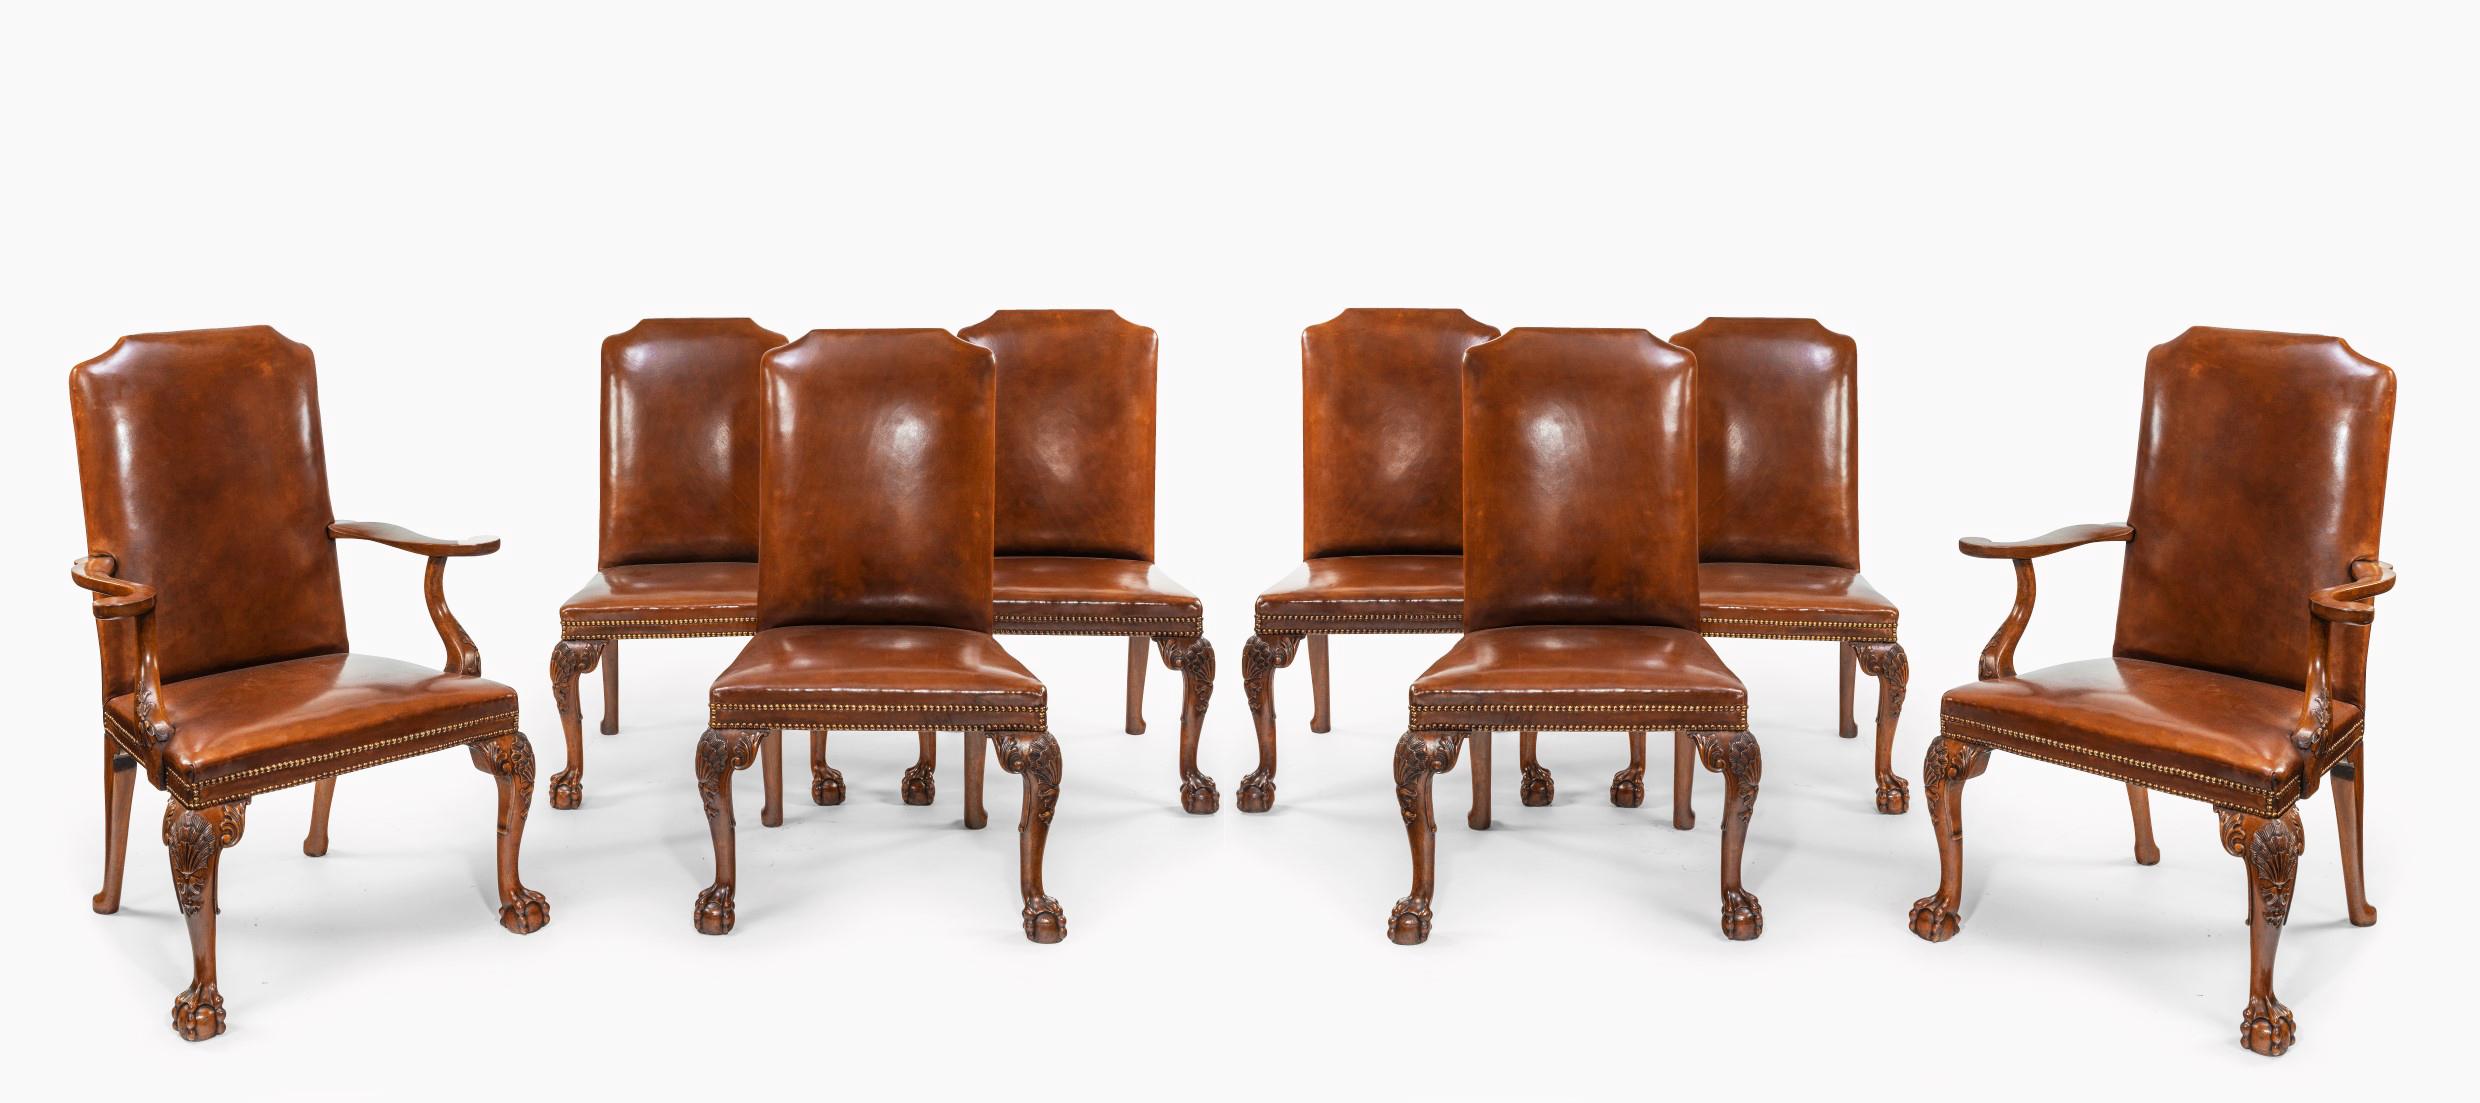 English Fine Set of Eight Walnut and Leather Cabriole Leg Dining Chairs Queen Anne Style